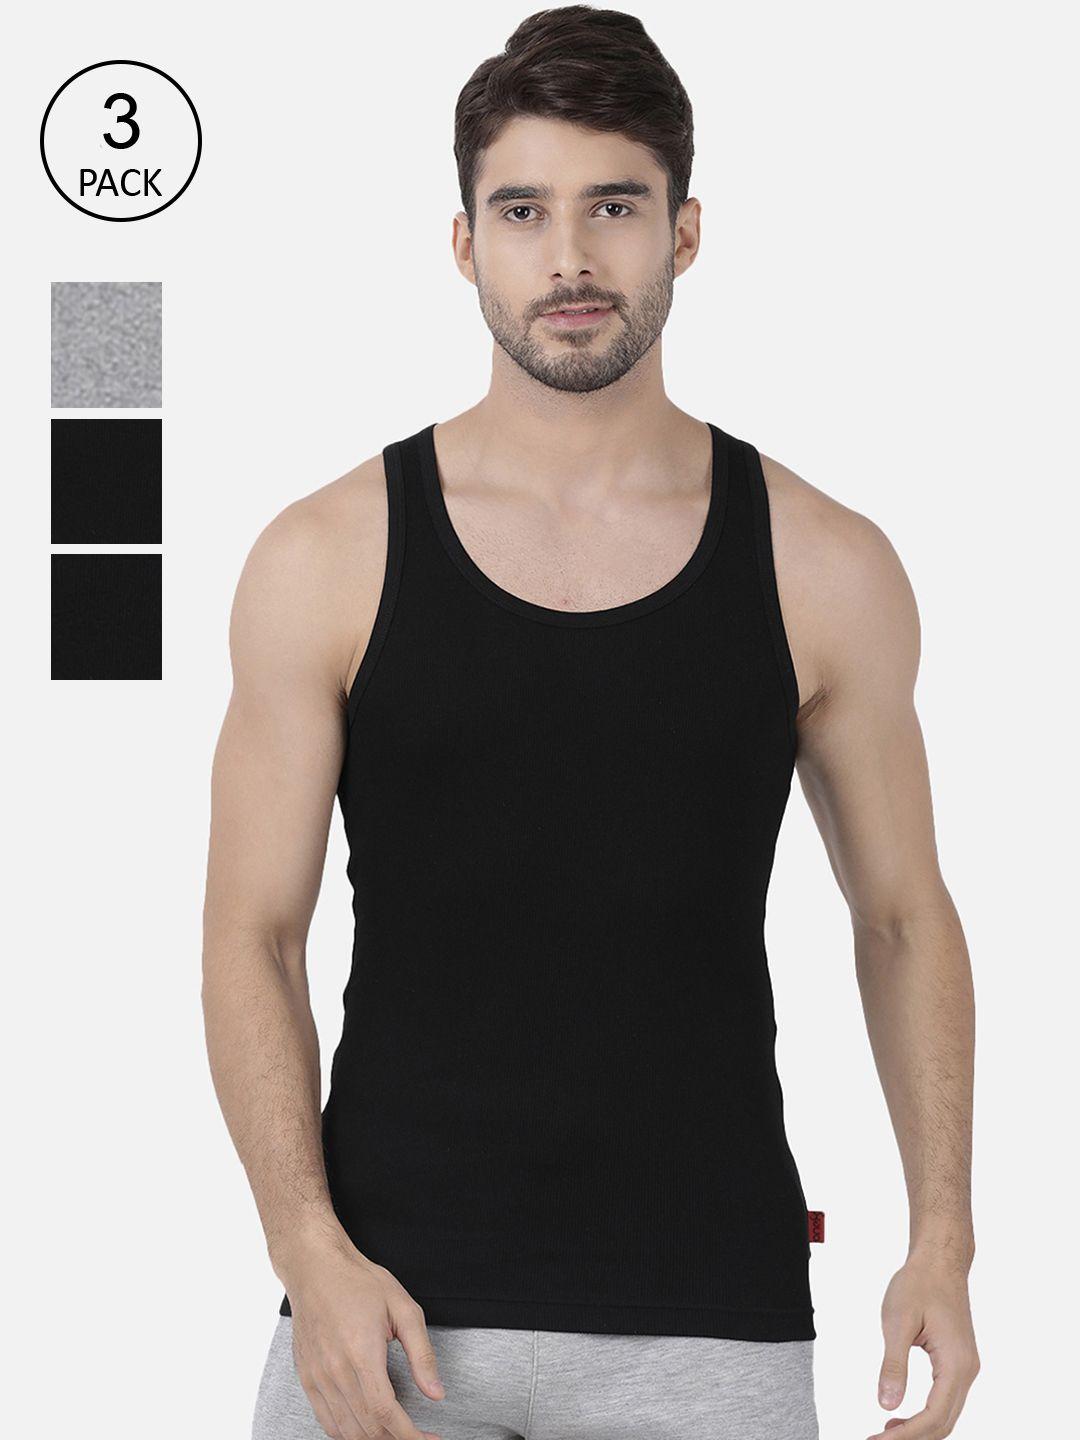 one8-by-virat-kohli-men-pack-of-3-black-and-grey-solid-cotton-innerwear